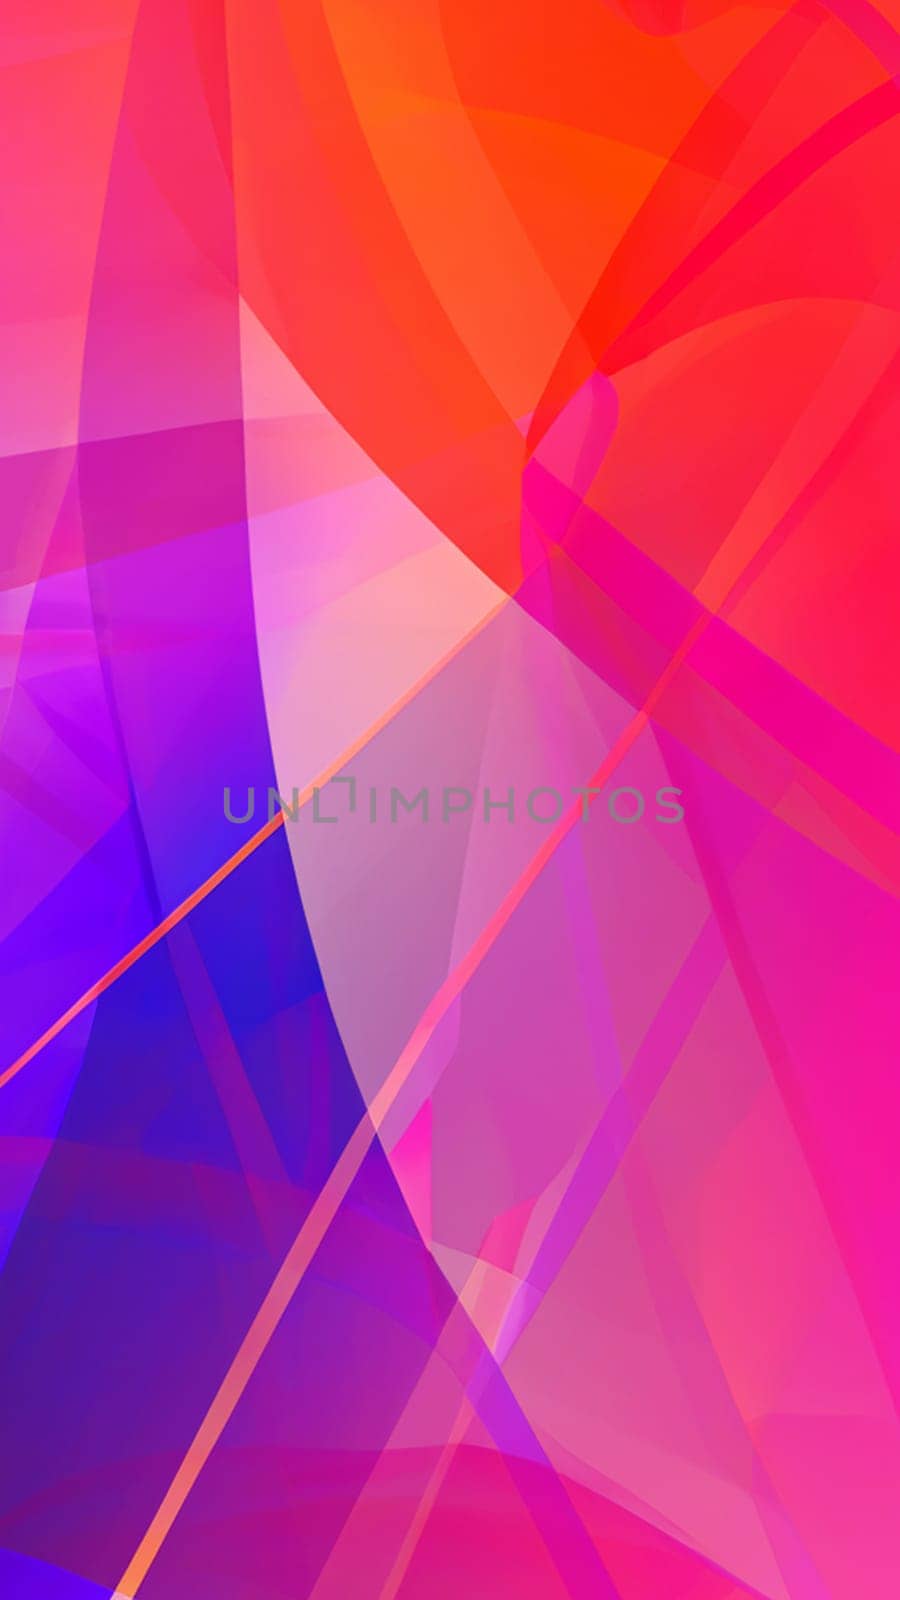 Abstract background with smooth lines in vibrant pink, orange and bright purple colors, portrait